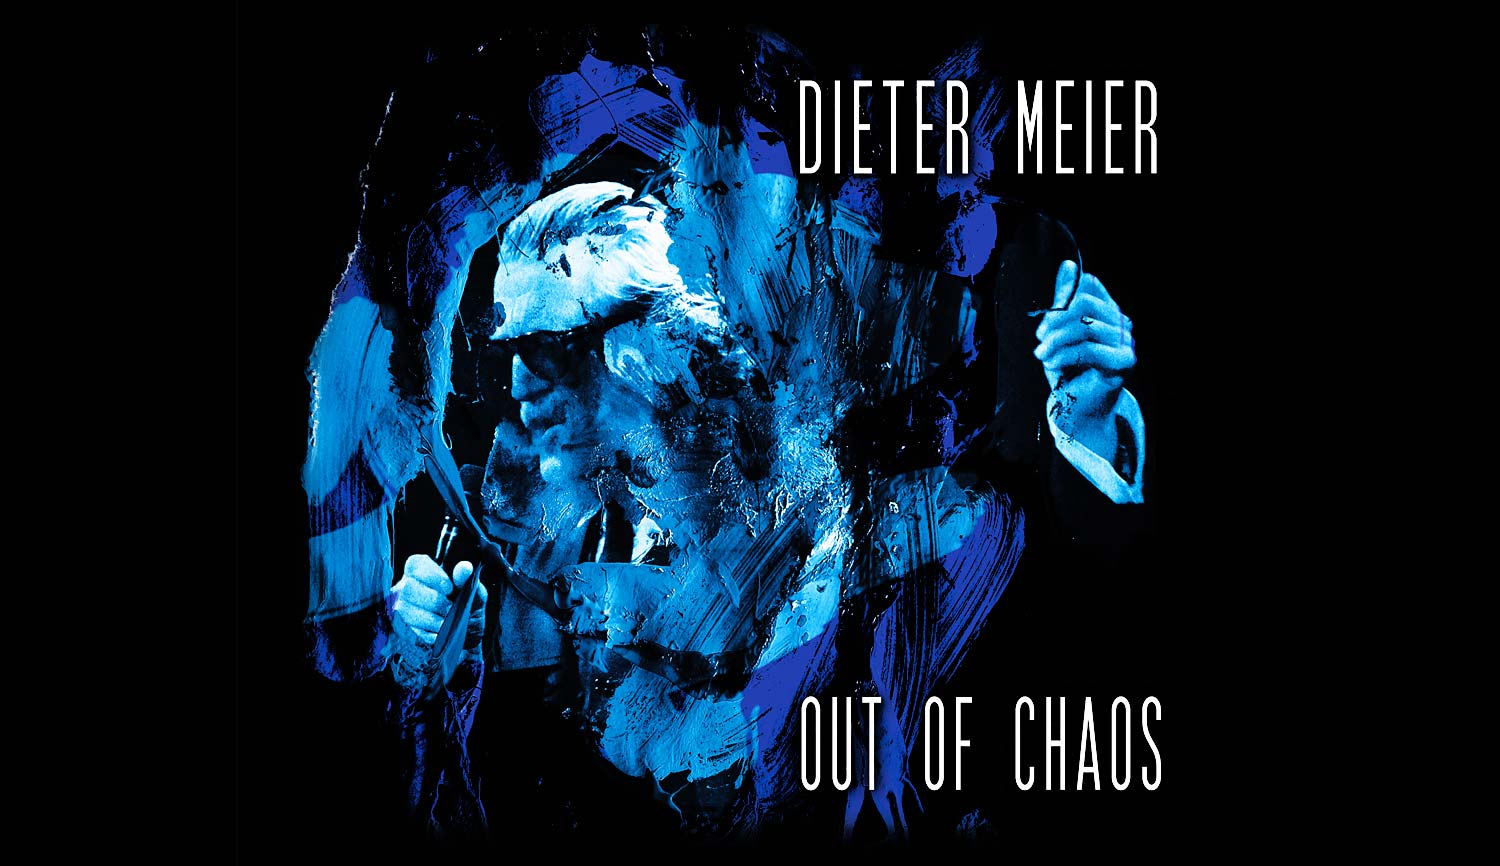 Dieter Meier - OUT OF CHAOS